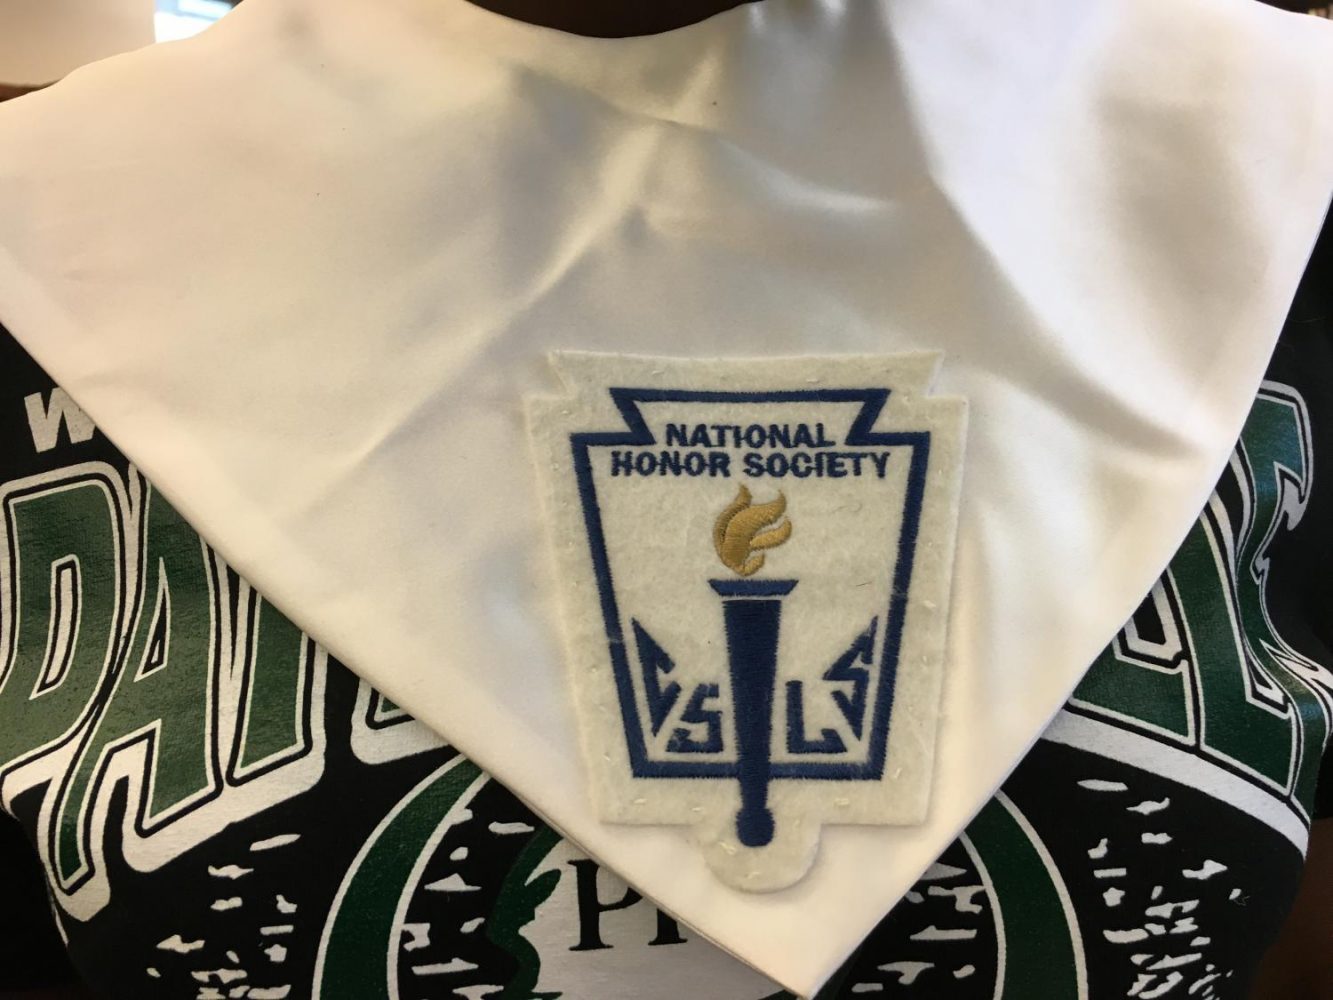 National Honor Society taps its new members during school